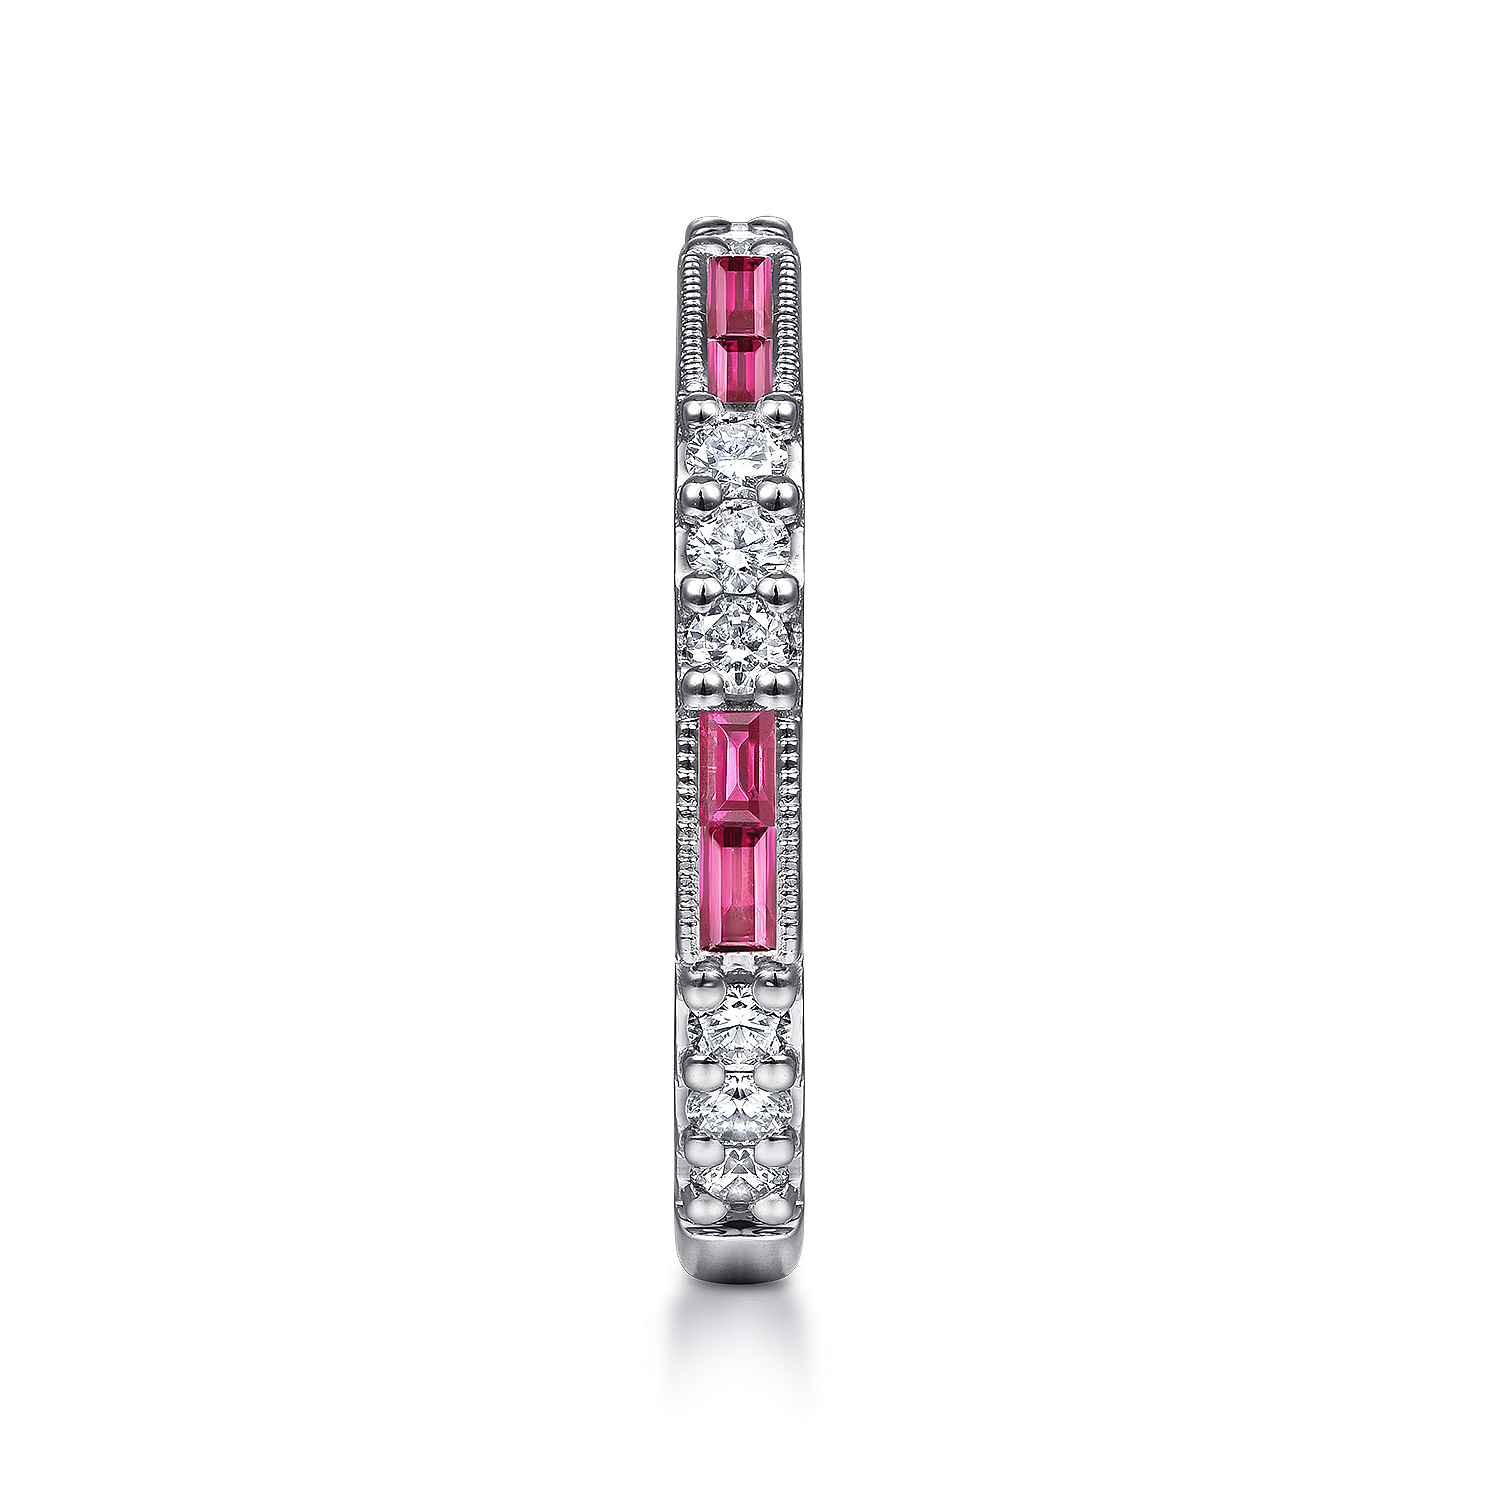 14K White Gold Ruby Baguette and Diamond Stackable Ring